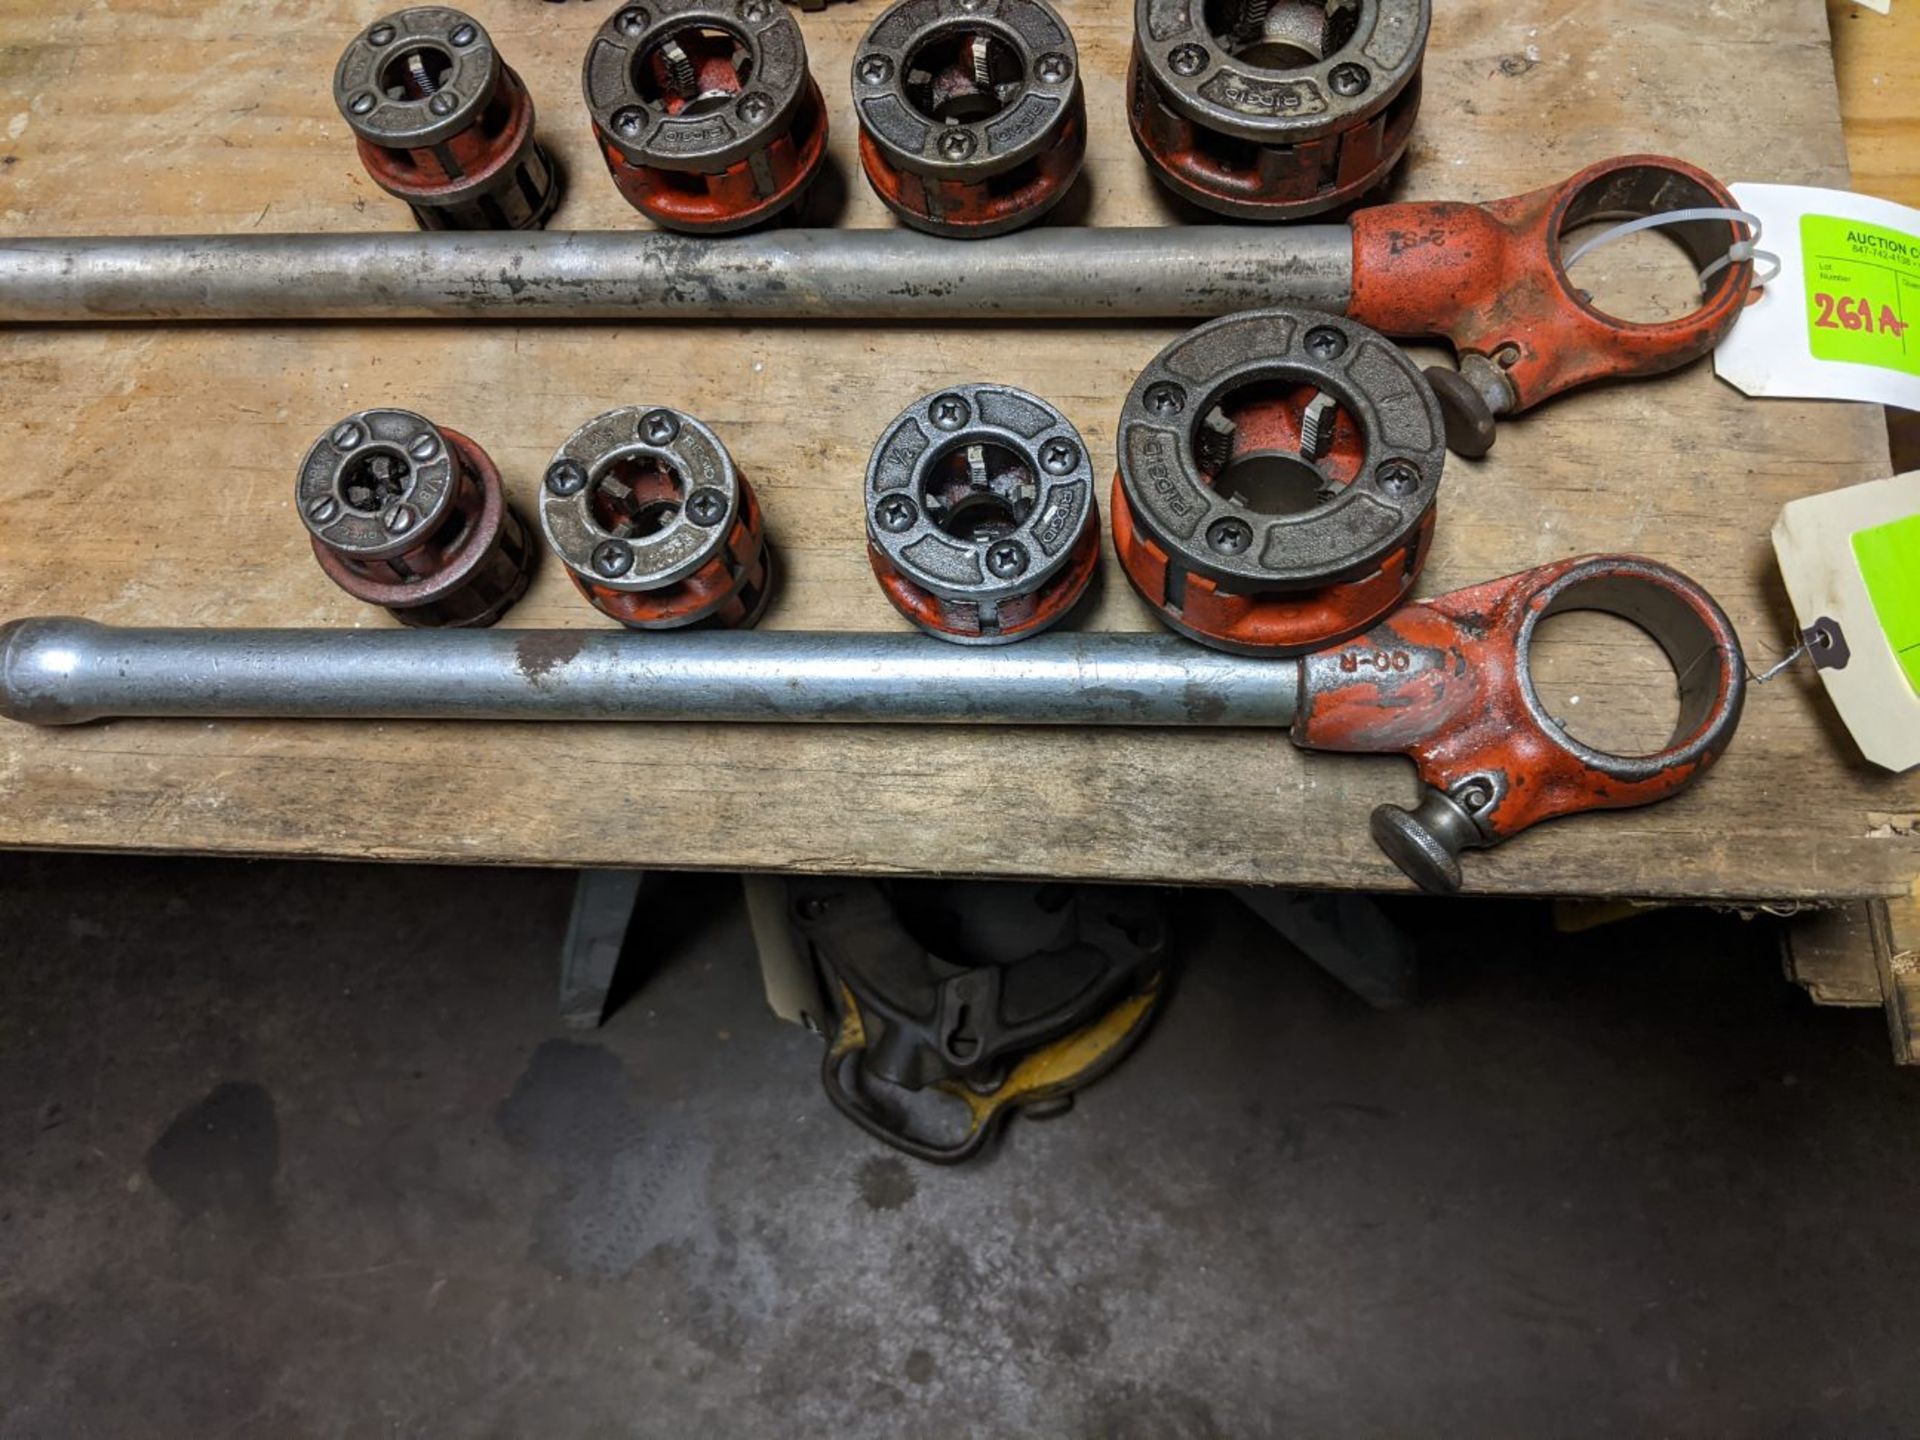 Ridgid pipe threaders with 1/8", 3/8", 1/2" and 1" attachments